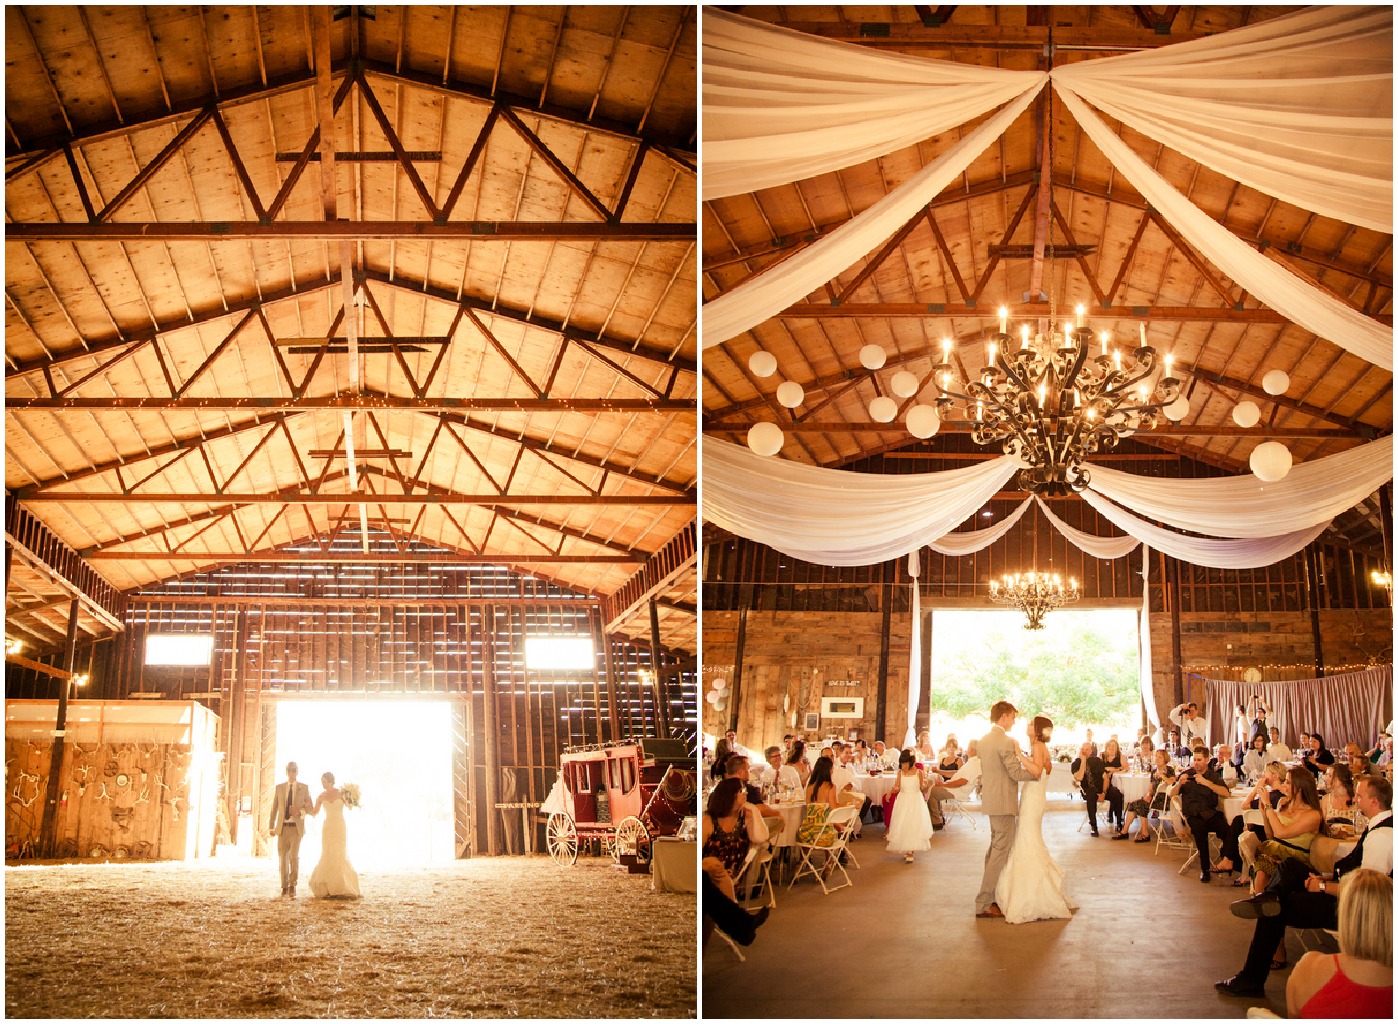 Great Barn Wedding Venues In California of the decade Don t miss out 